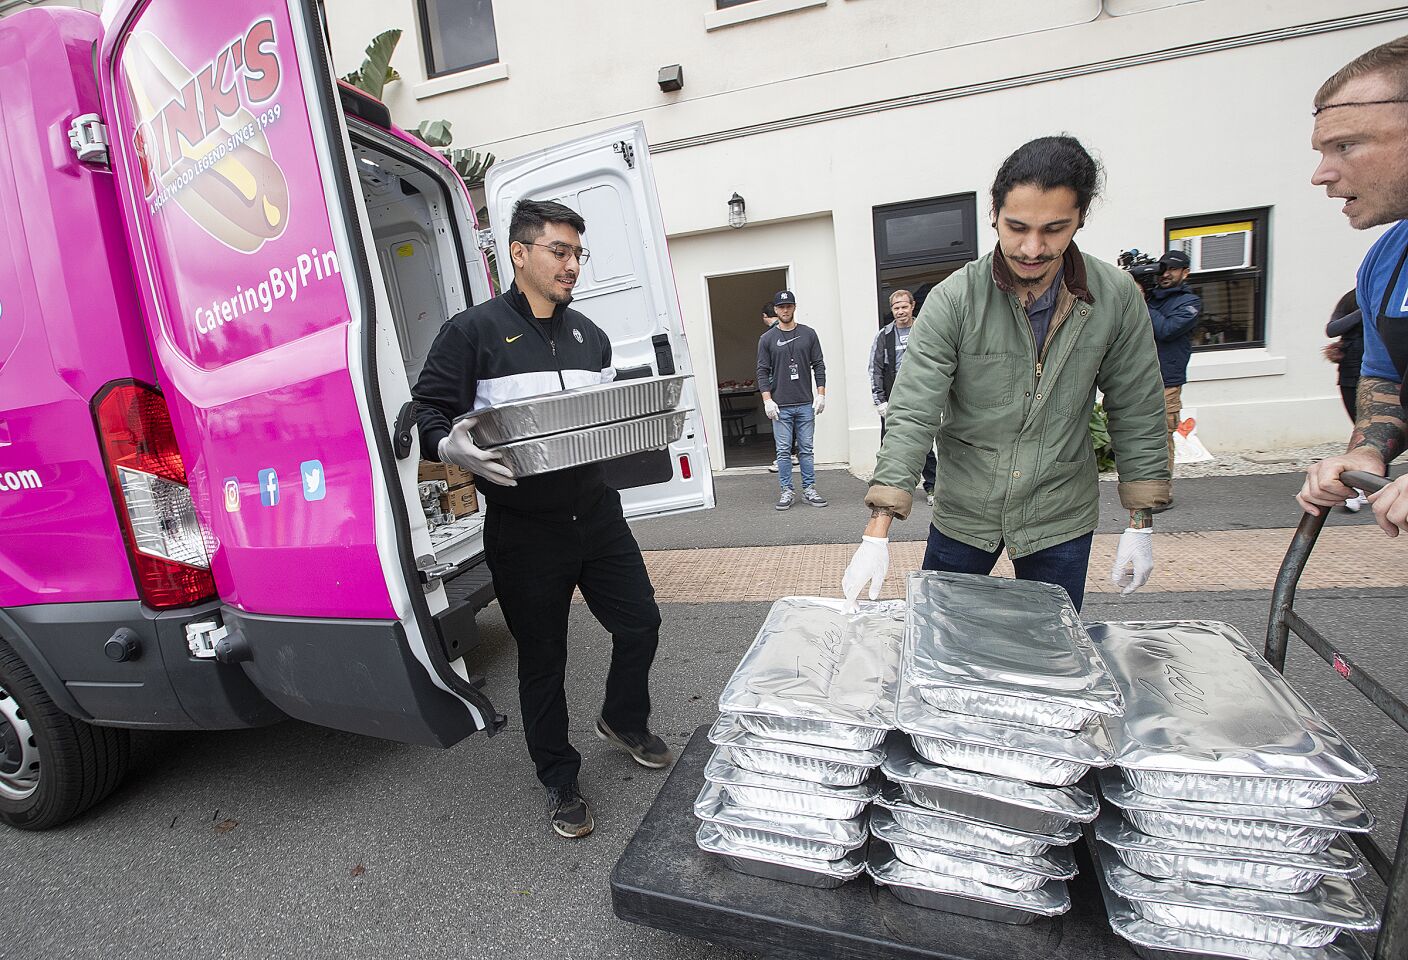 Pink's Hot Dogs workers deliver donated food to the Dream Center in L.A.